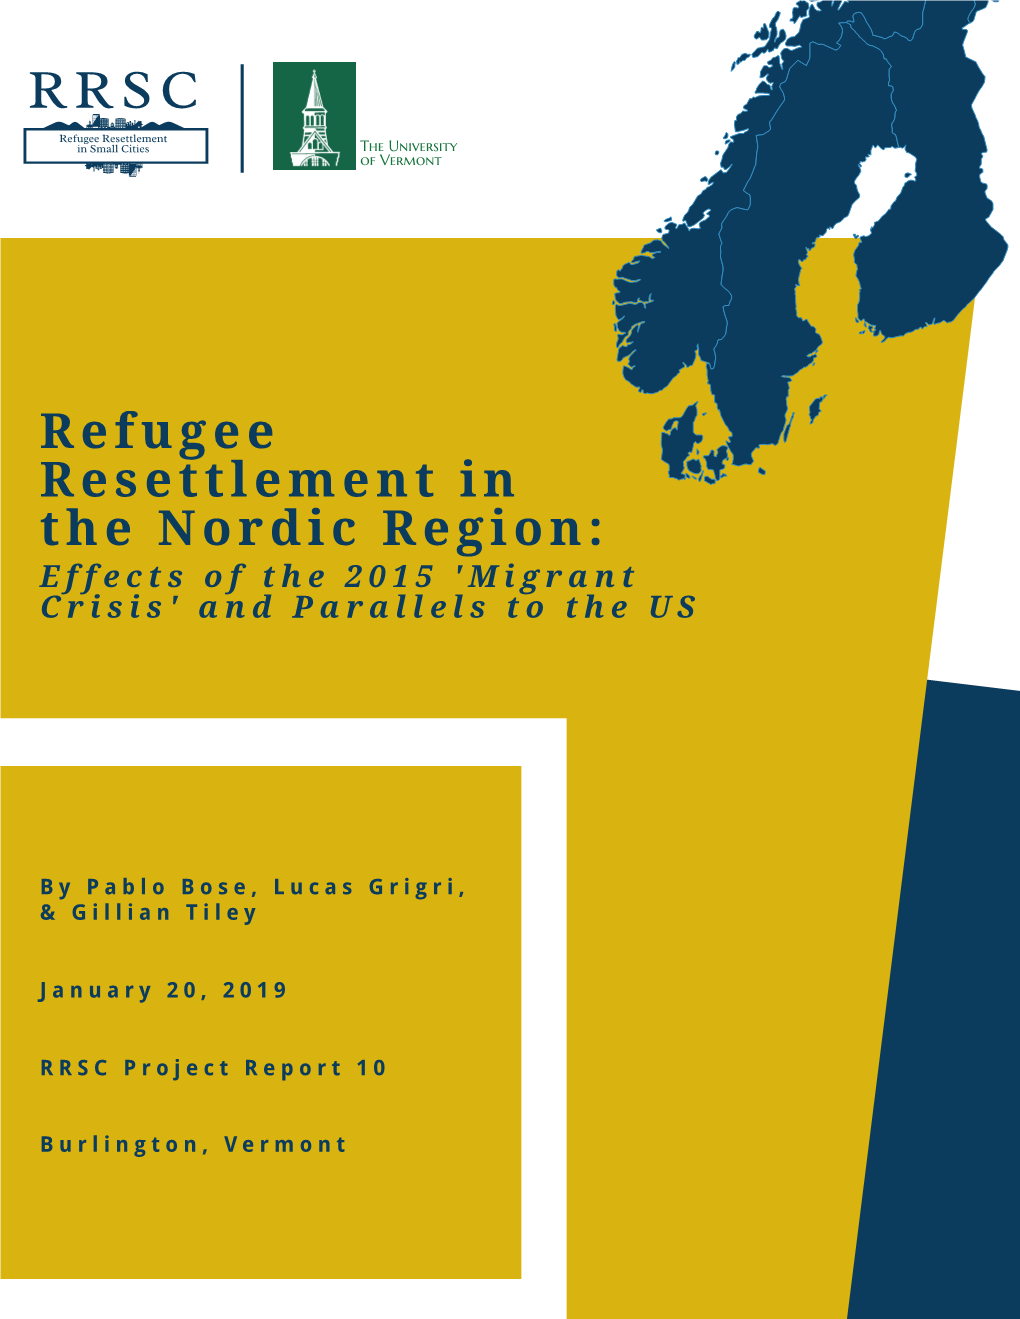 RRSC-PR10: Refugee Resettlement in the Nordic Region: Effects of The